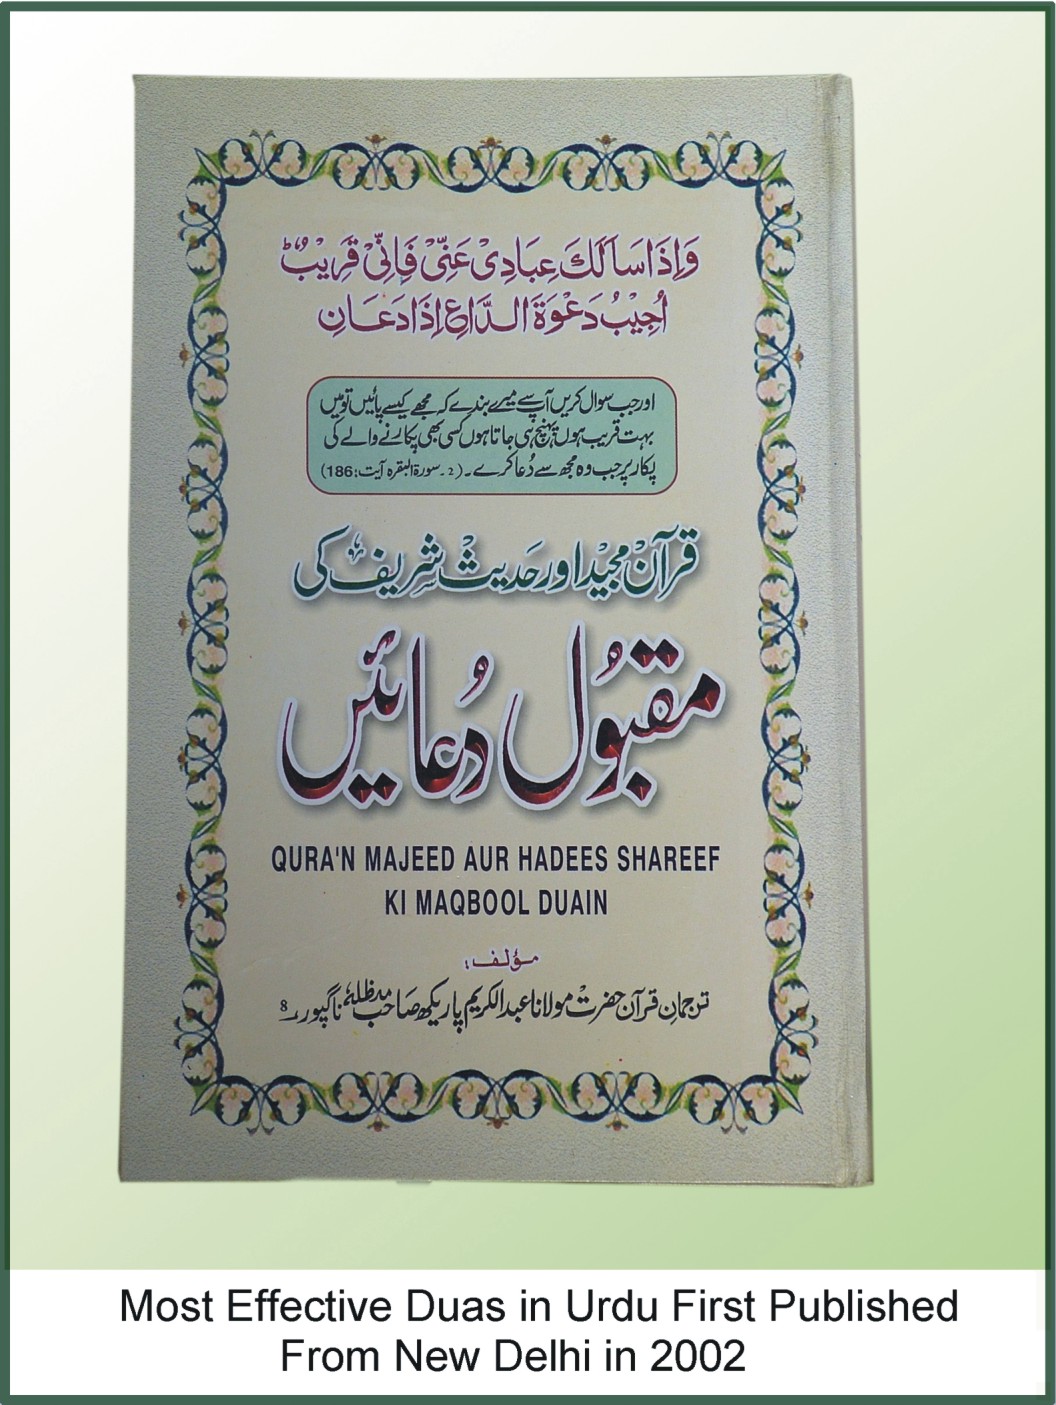 Most Effective Duas (Urdu) First Published from New Delhi in 2002